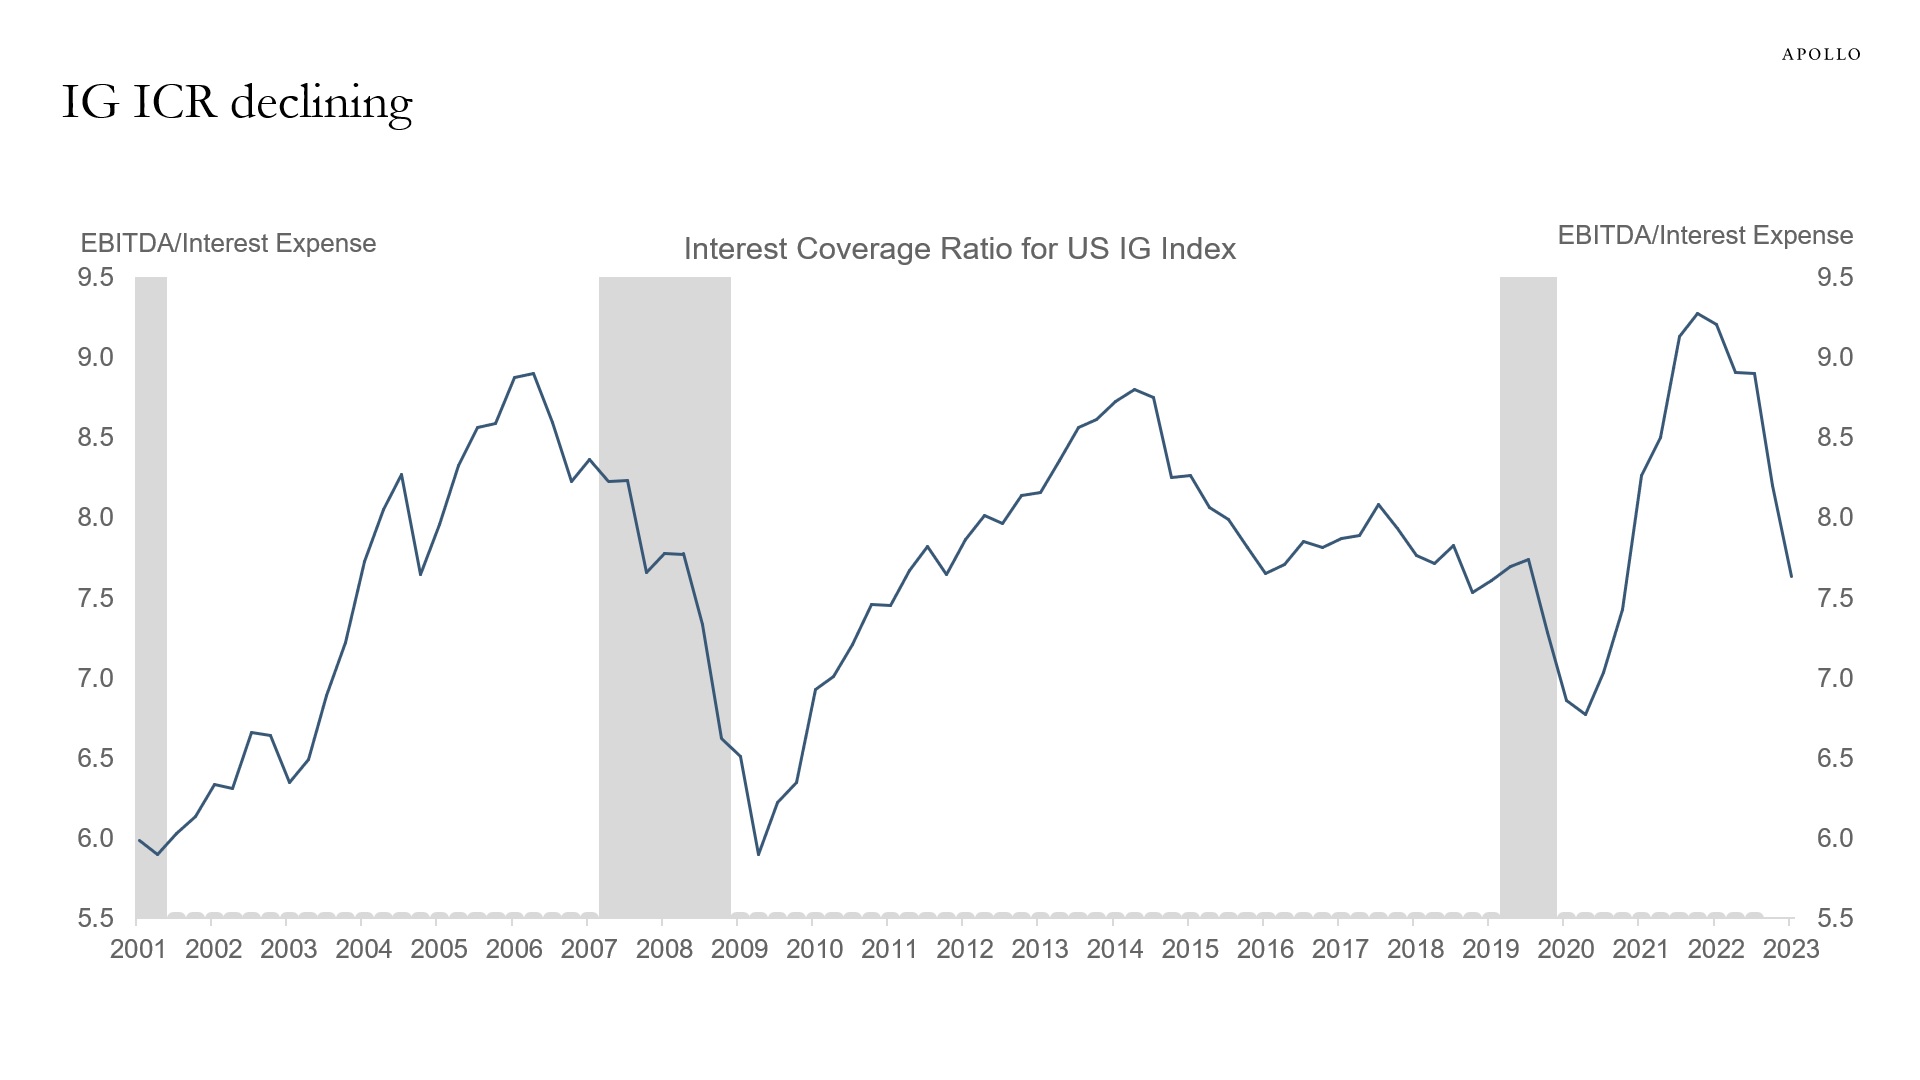 The interest coverage ratio for investment grade bonds continues to fall.